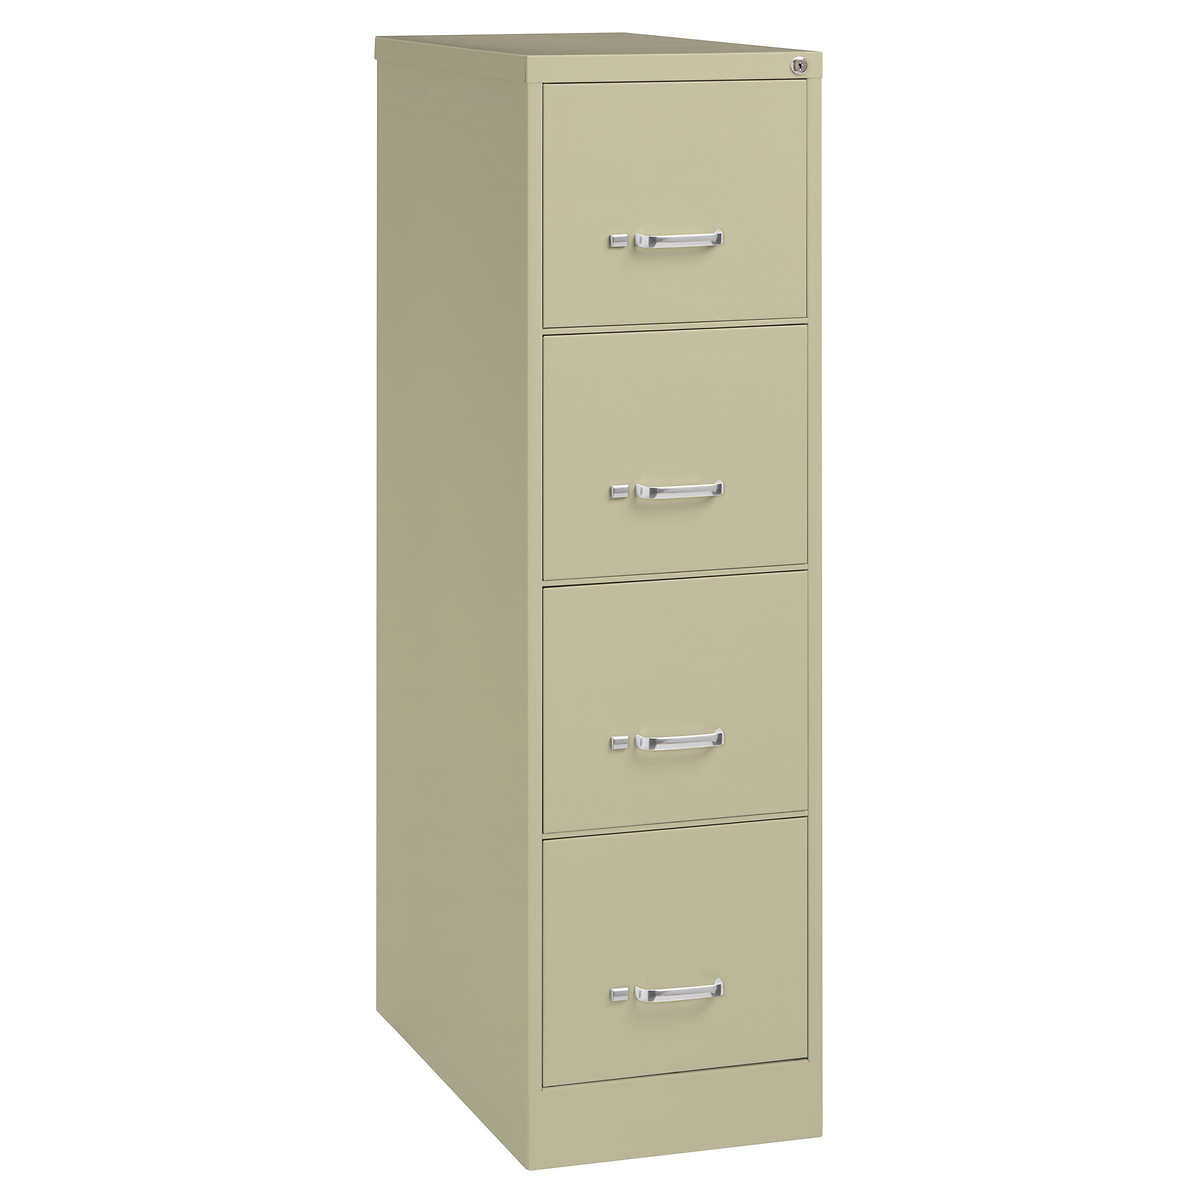 oif vertical 4-drawer file cabinet 18-14w x 26-12d x 52h black costco on 4-drawer locking file cabinet costco